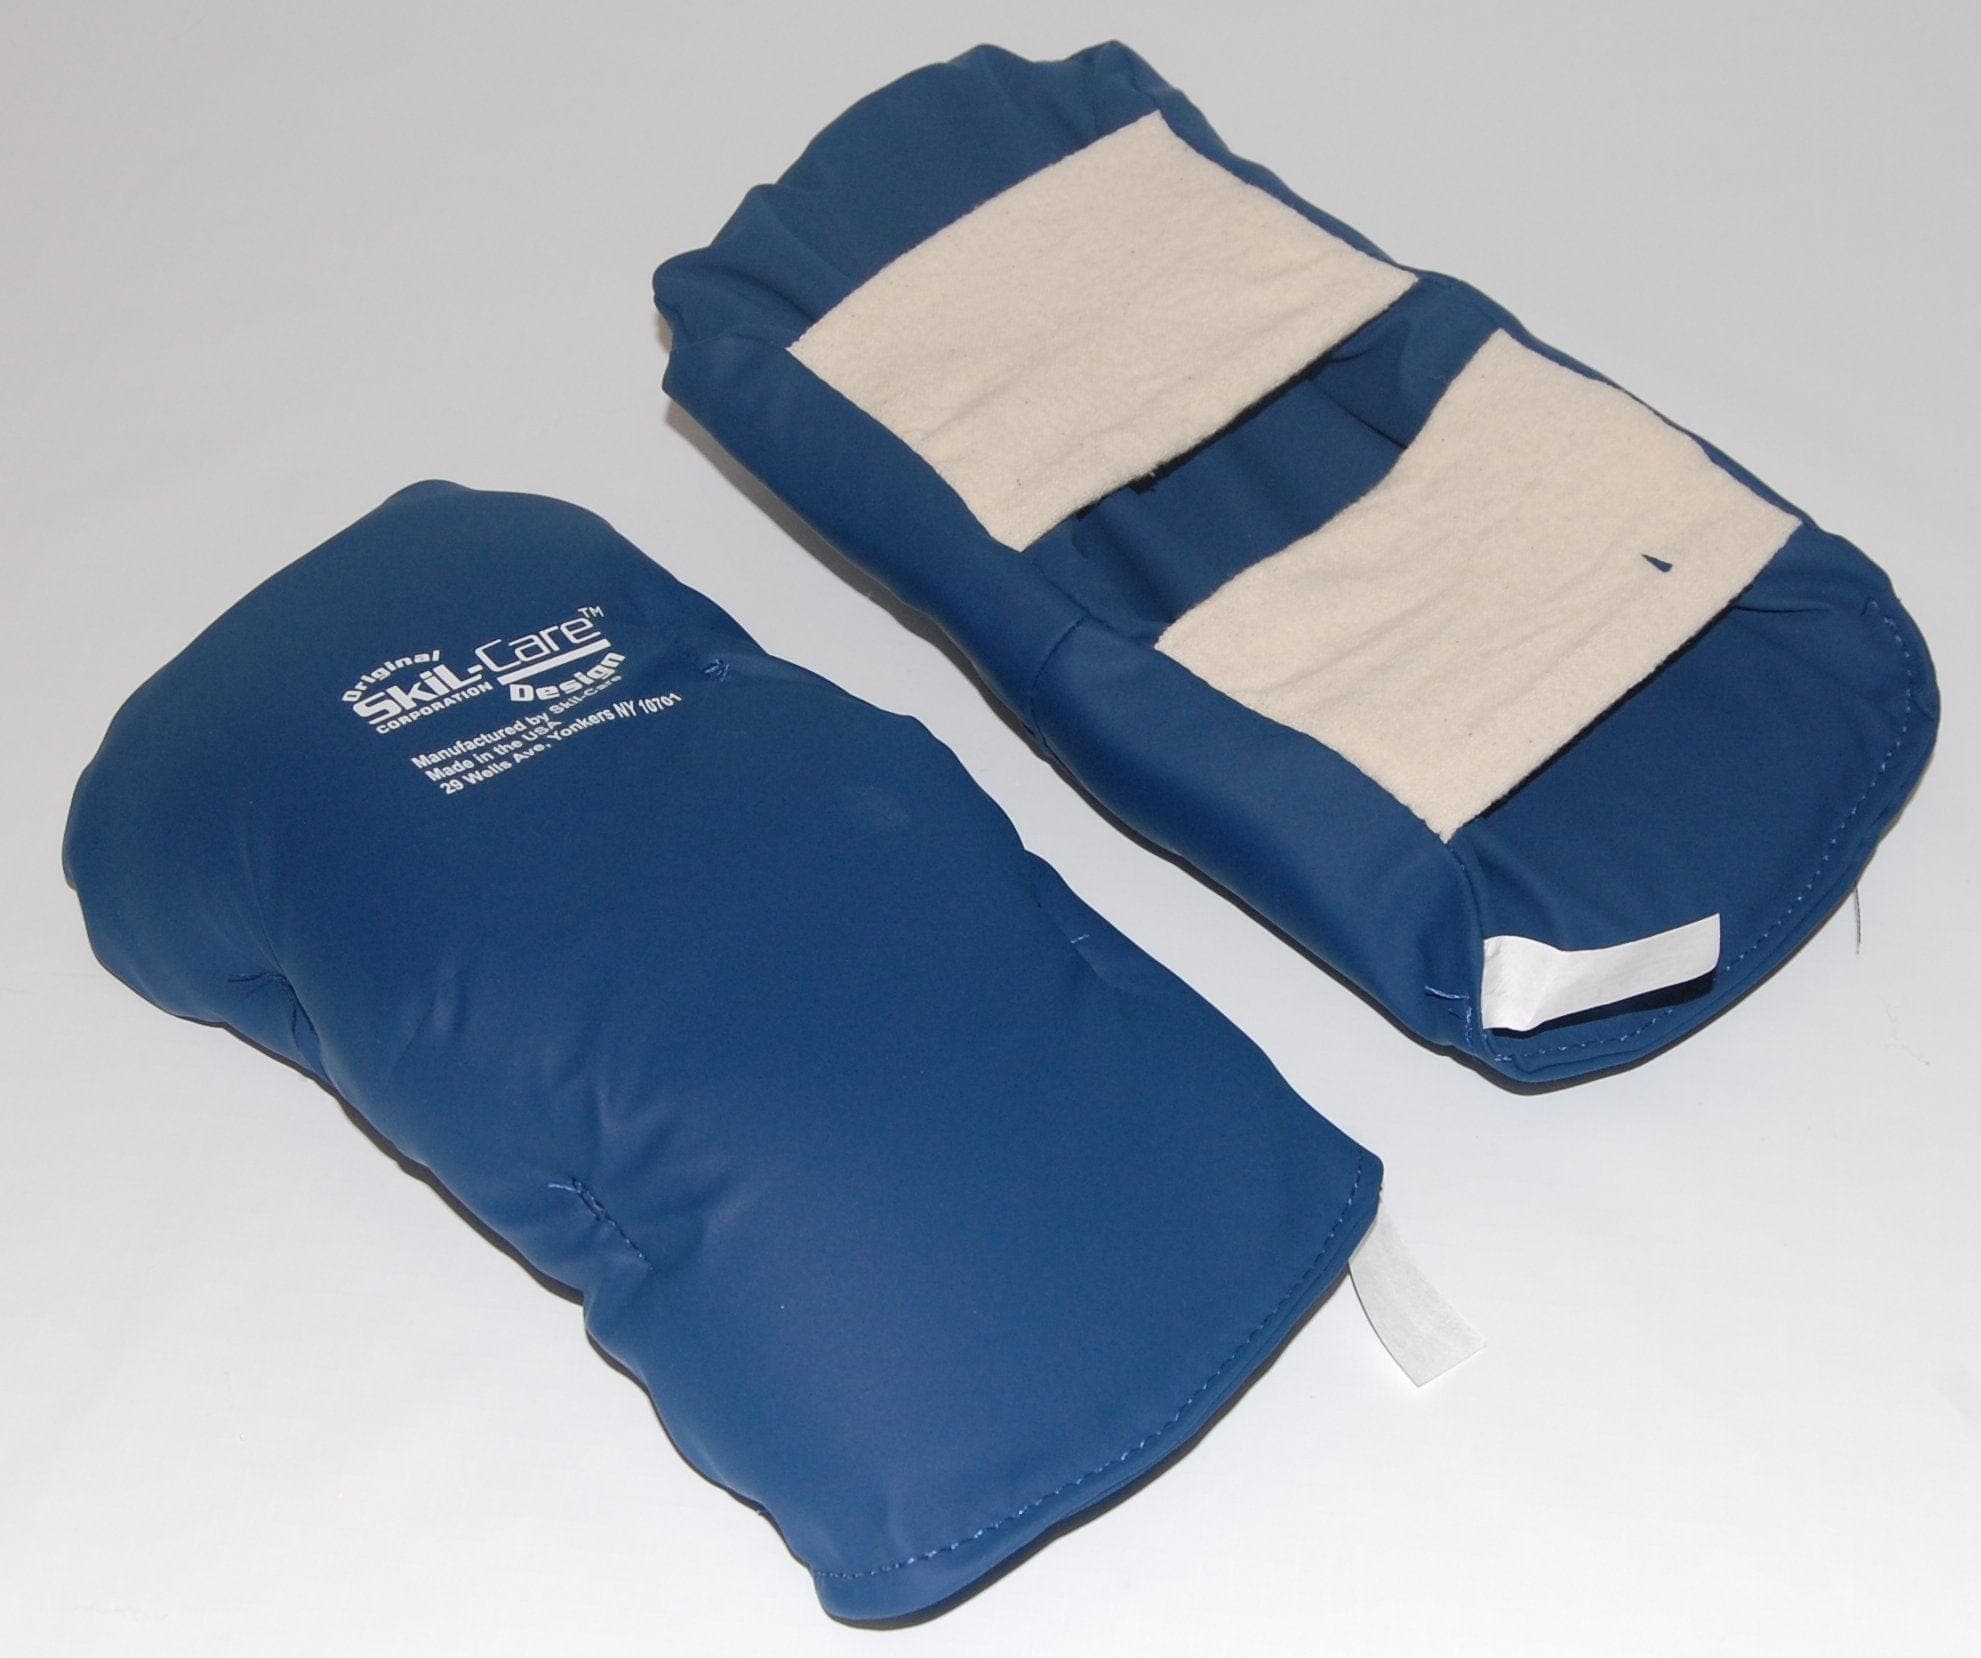 SkilCare Wound Management Visco-Foam with LSII cover / Single Pair SkilCare Visco-Foam Elbow Pad Protectors w/LSII Cover